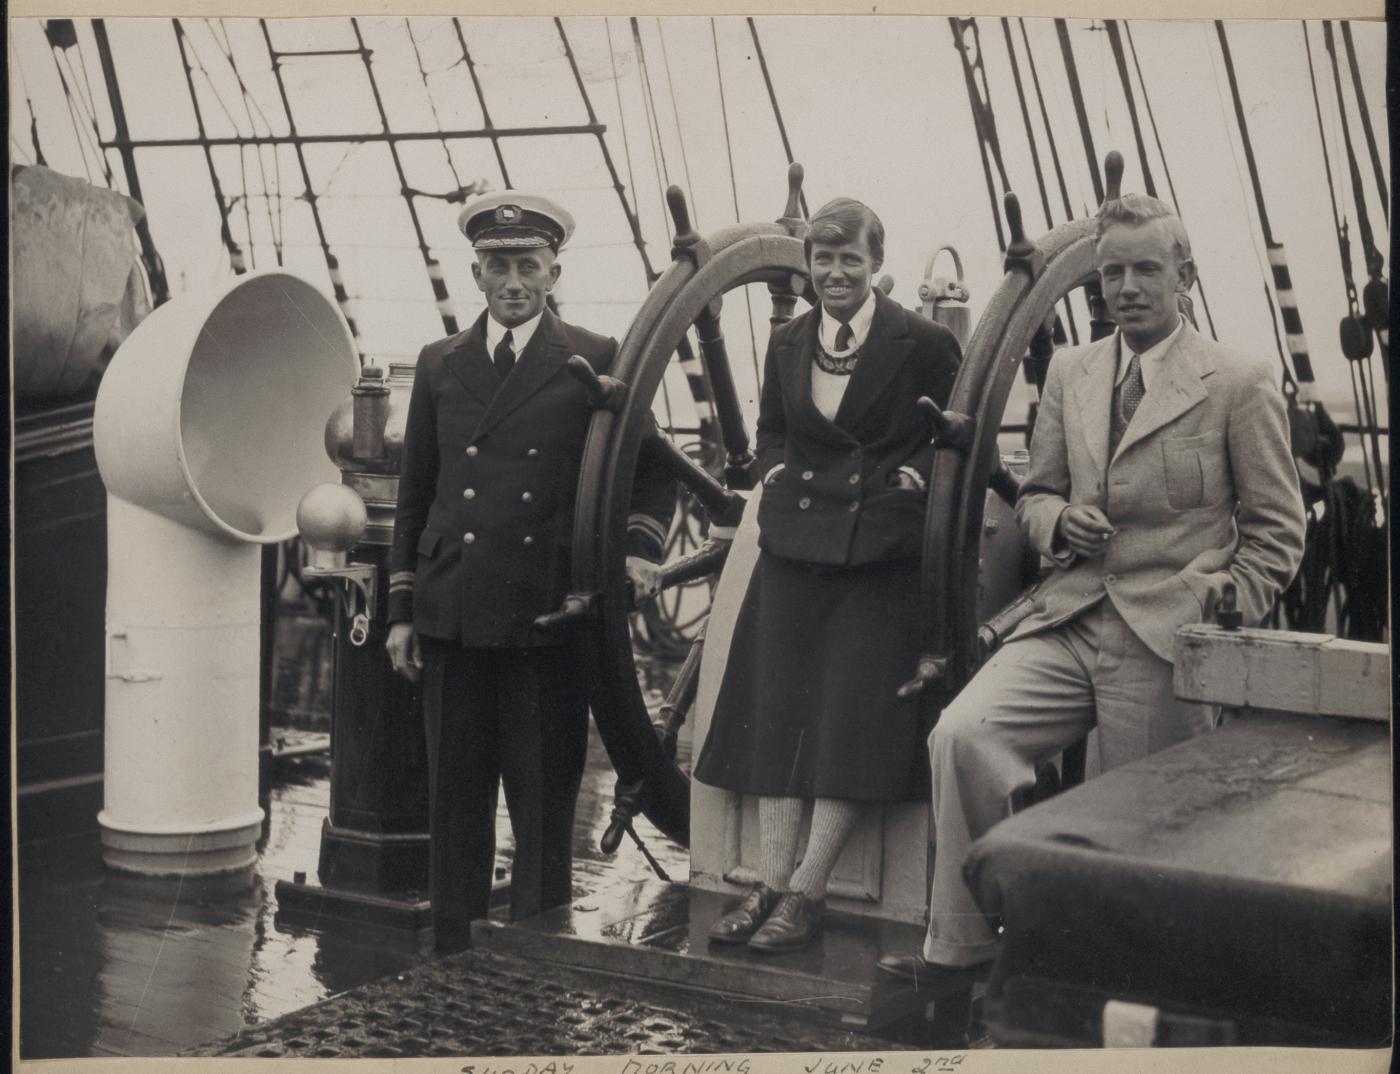 An image showing 'JOD 94_2 | Journals of Miss Winifred Lloyd aboard HERZOGIN CECILIE, S V VIKING AND OLIVEBANK January 1935 - May 1938  '